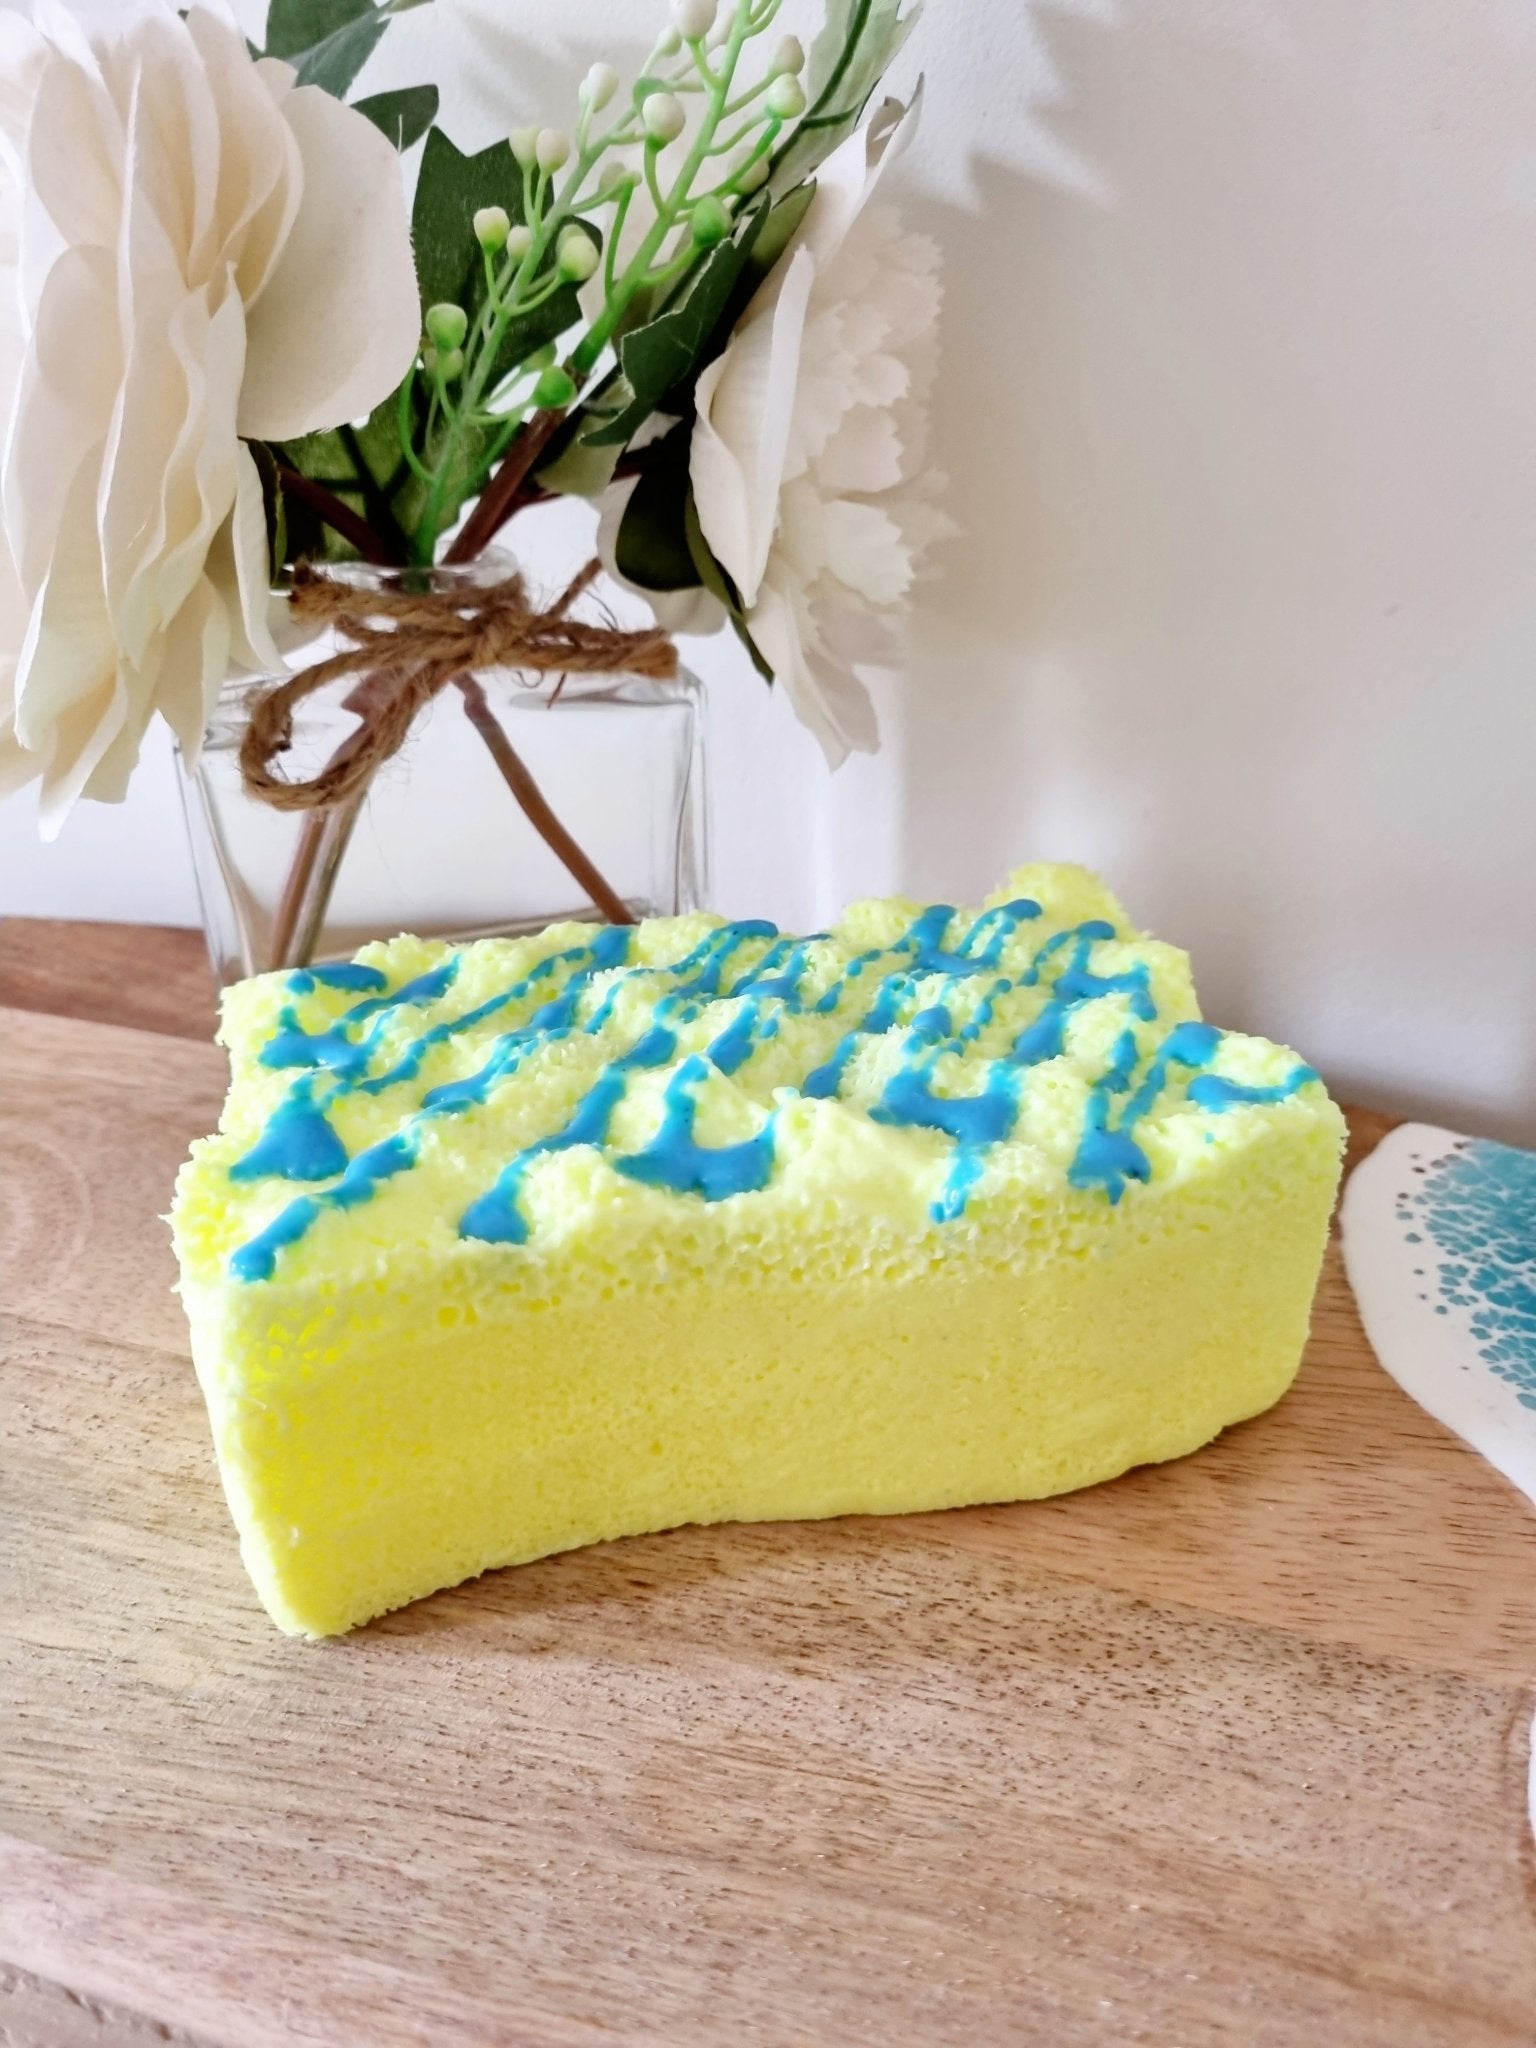 REDUCED TO CLEAR - Wavy Soap Infused Exfoliating Massage Sponge - Soap Sponge - Cottage Fresh Scents